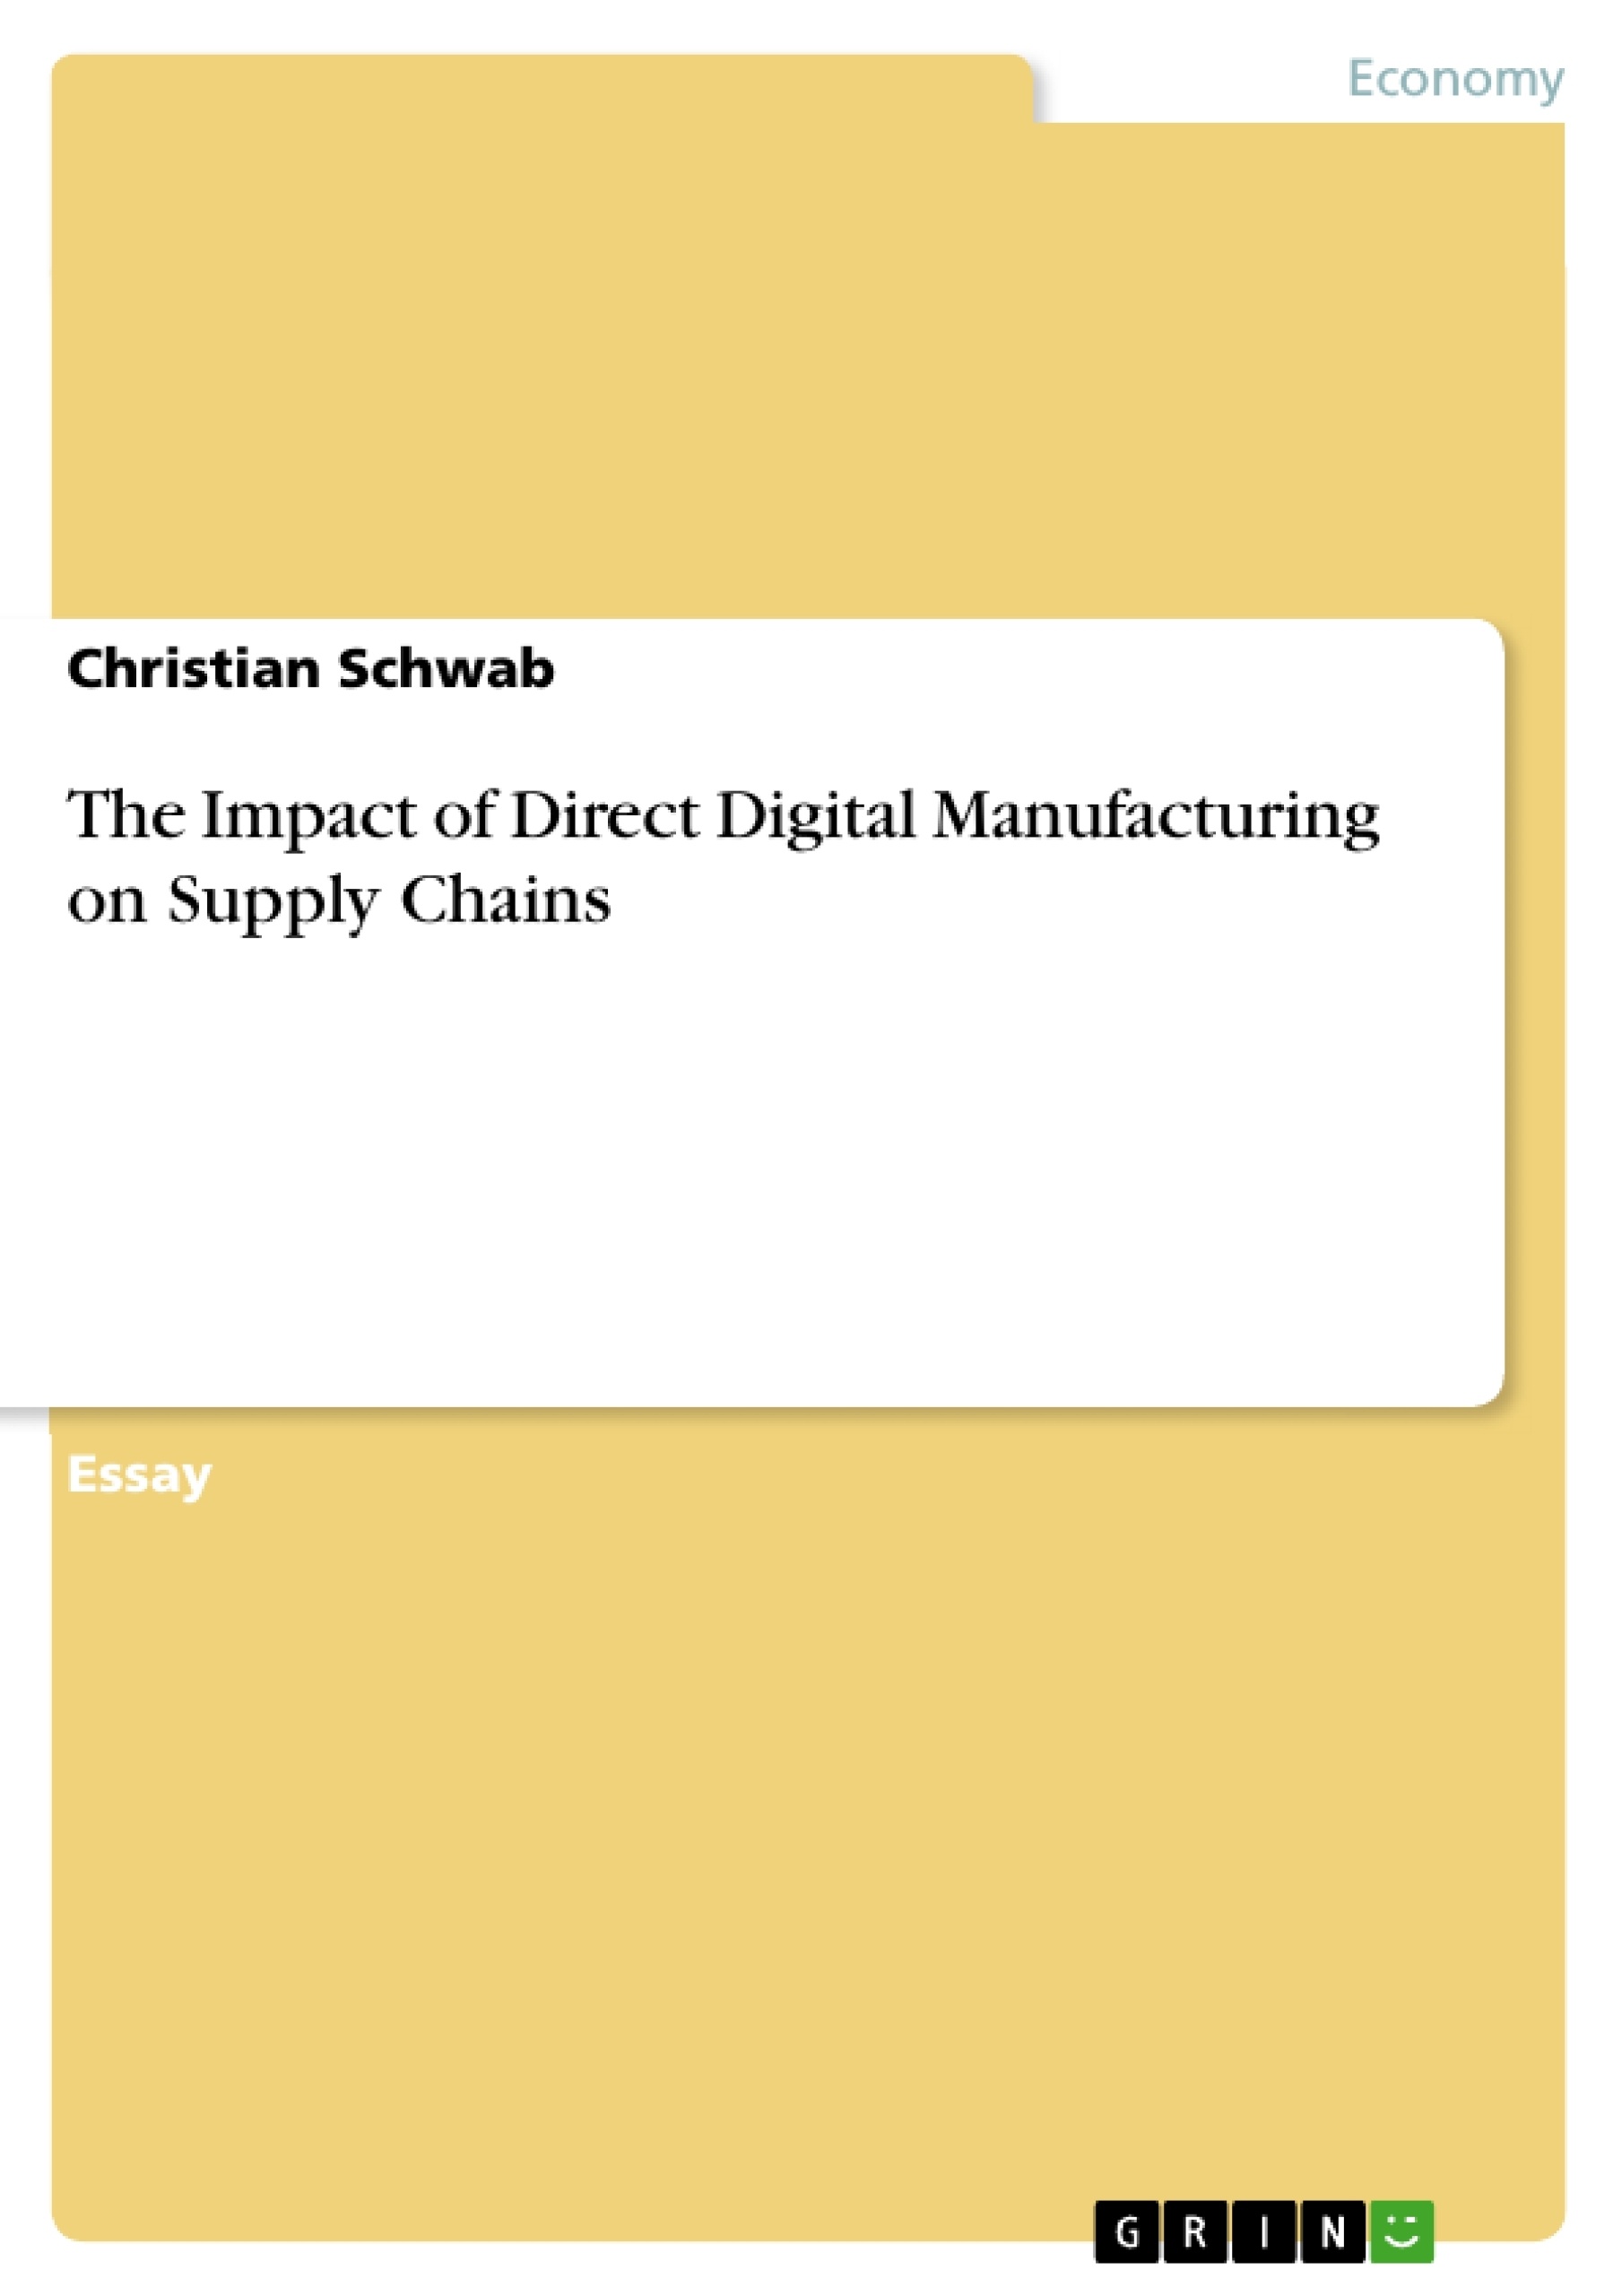 Title: The Impact of Direct Digital Manufacturing on Supply Chains